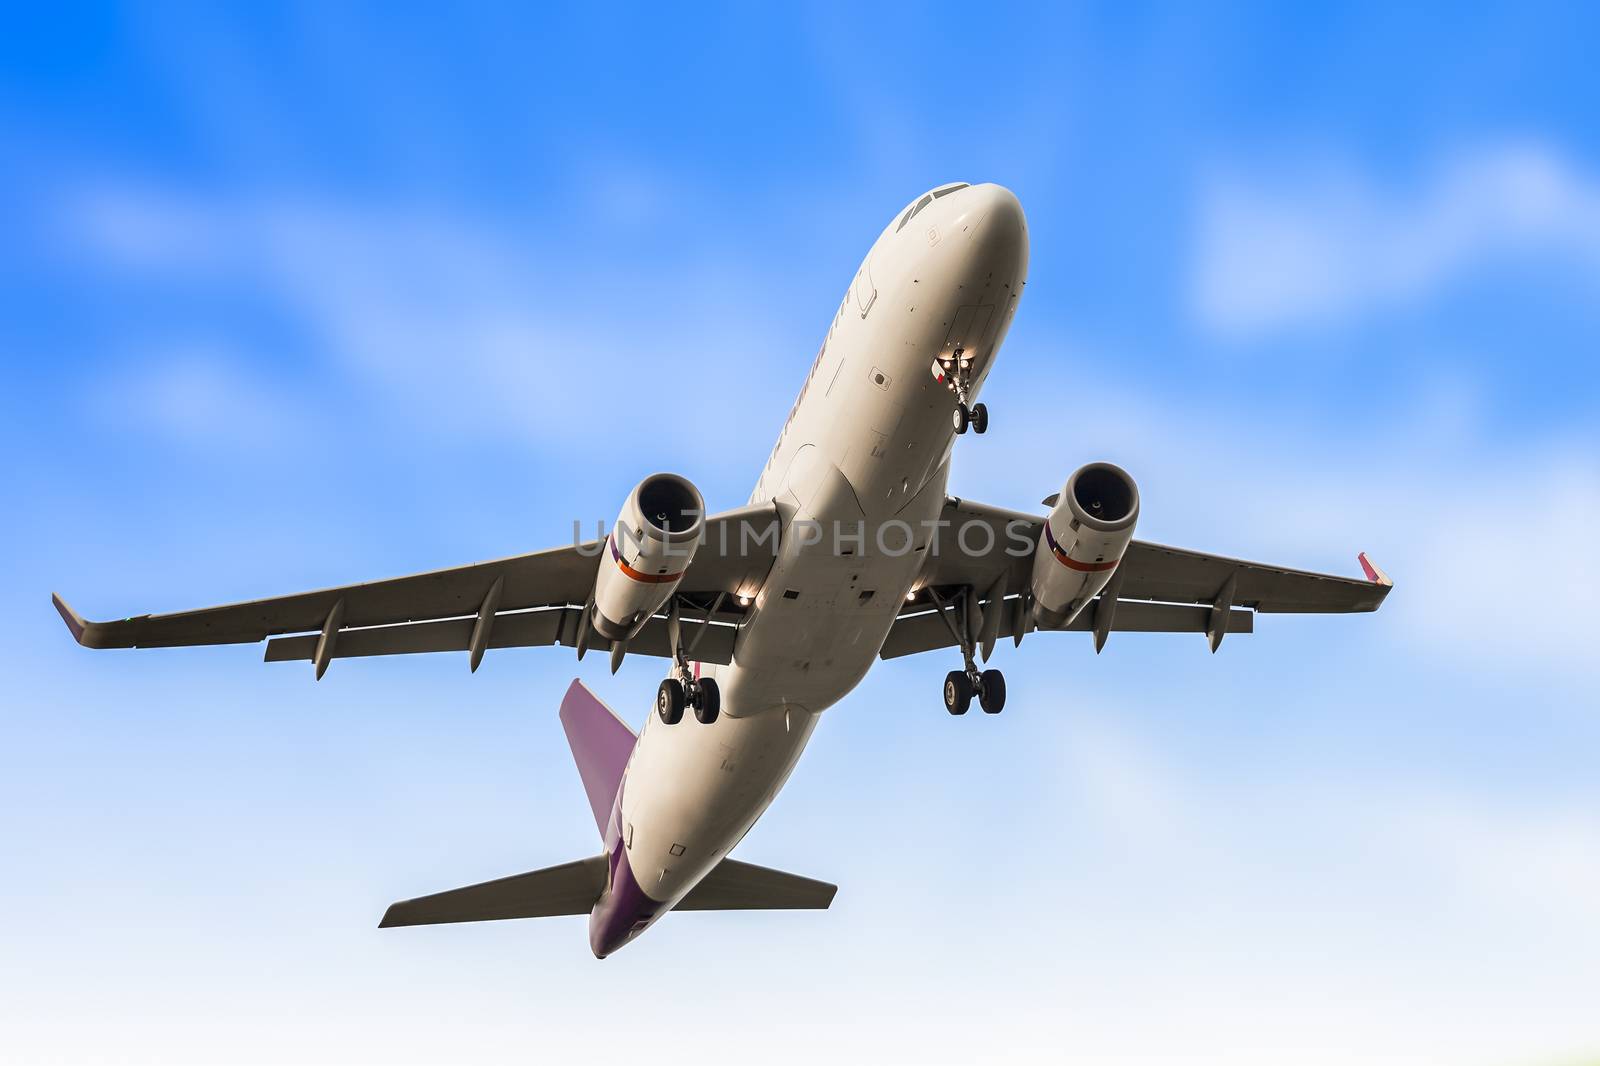 Passenger business airplane take off and flying in blue sky, use for air transport, journey and travel concept